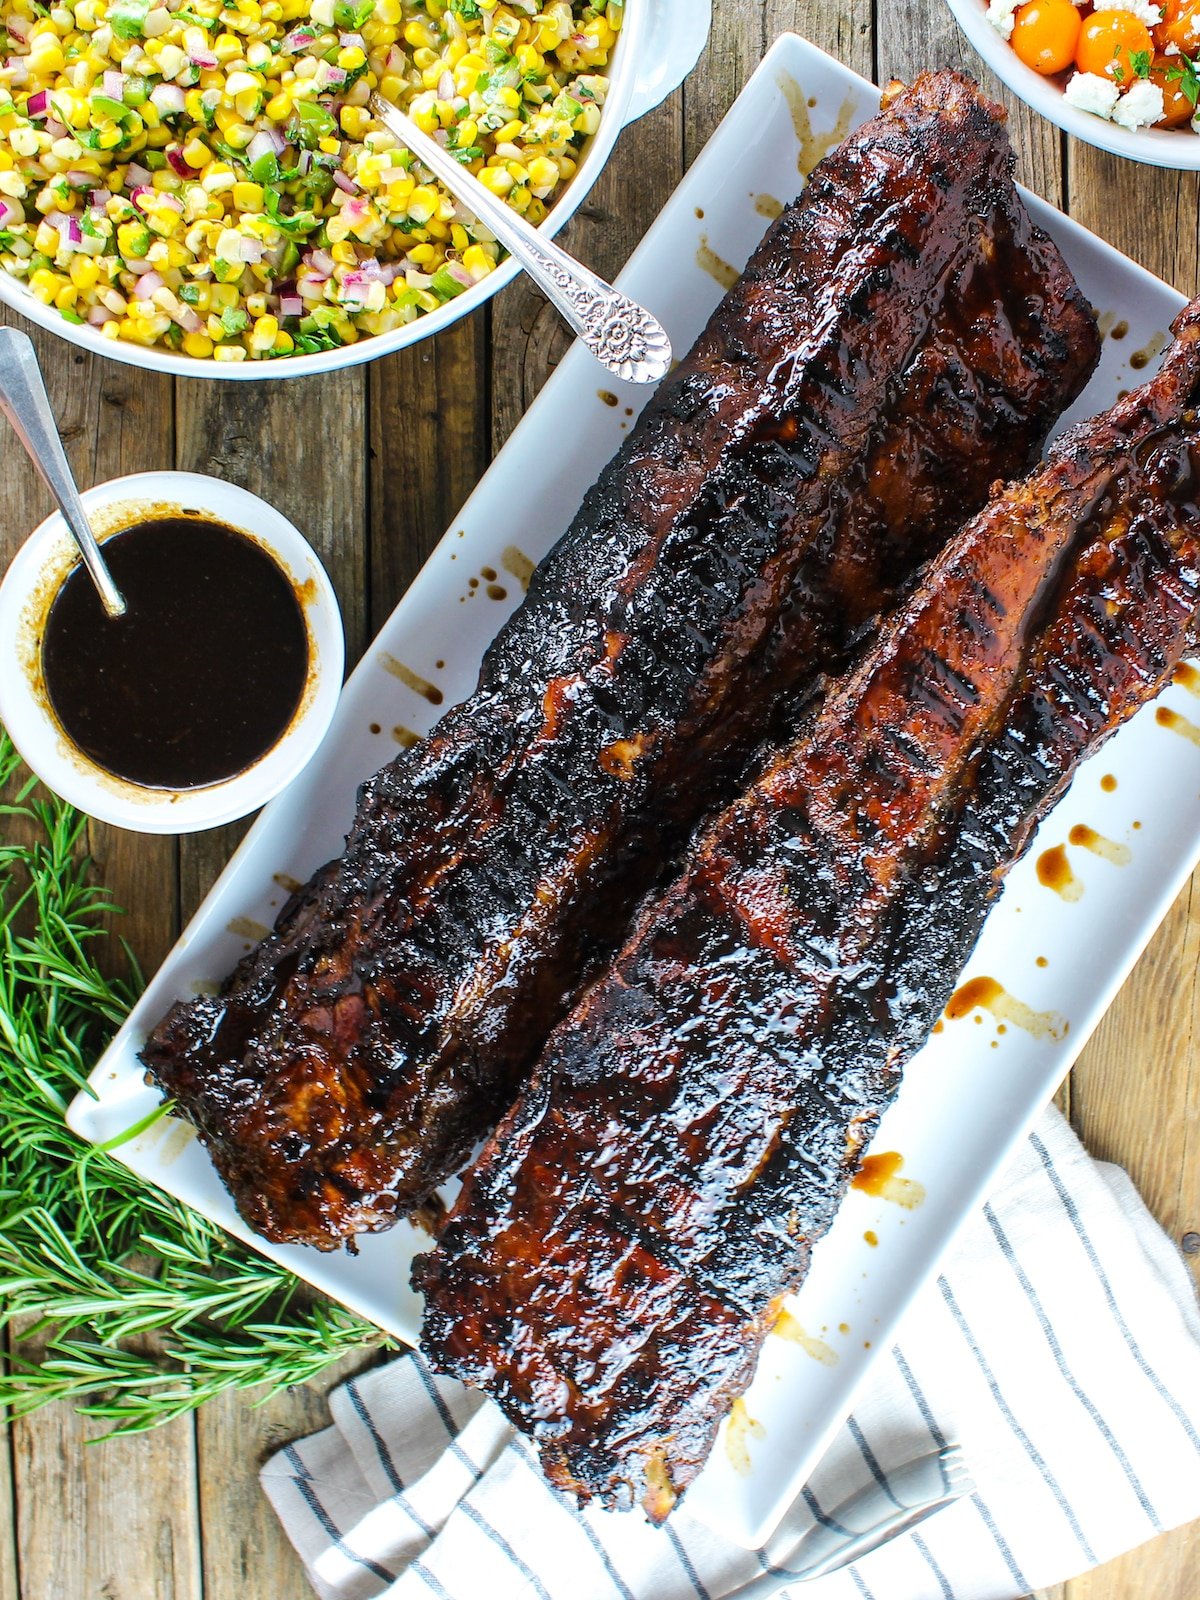 Two racks of glazed sticky Balsamic Baby Back Ribs and corn salad on the side.